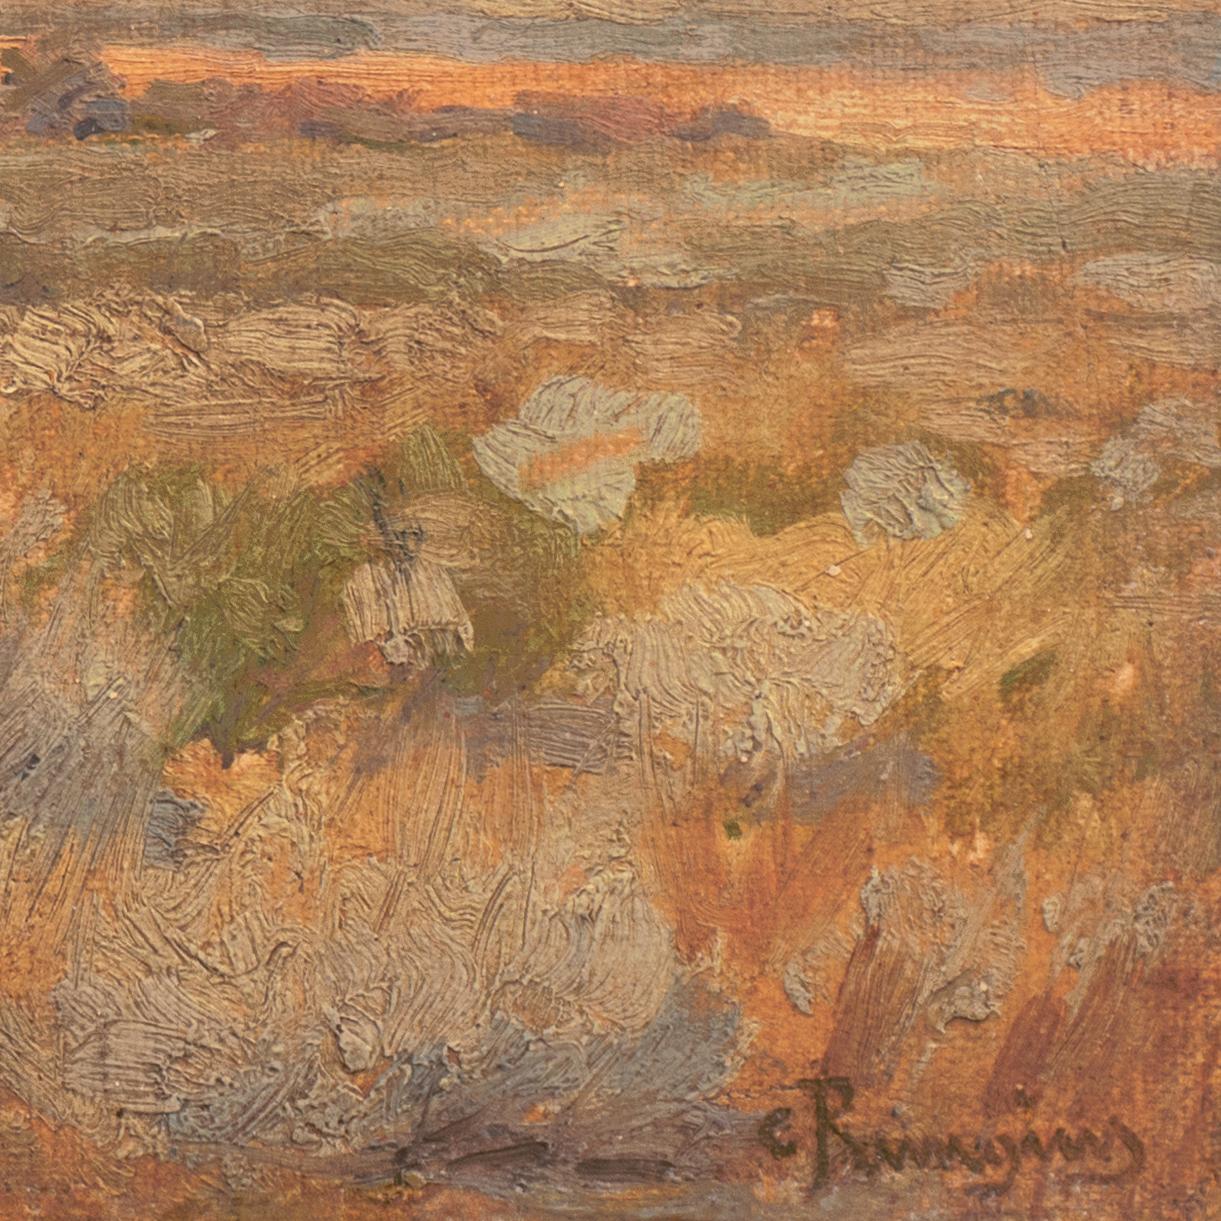 'Montana Hills', Academy of Arts, Berlin, National Academy of Design  - Painting by Carl Rungius